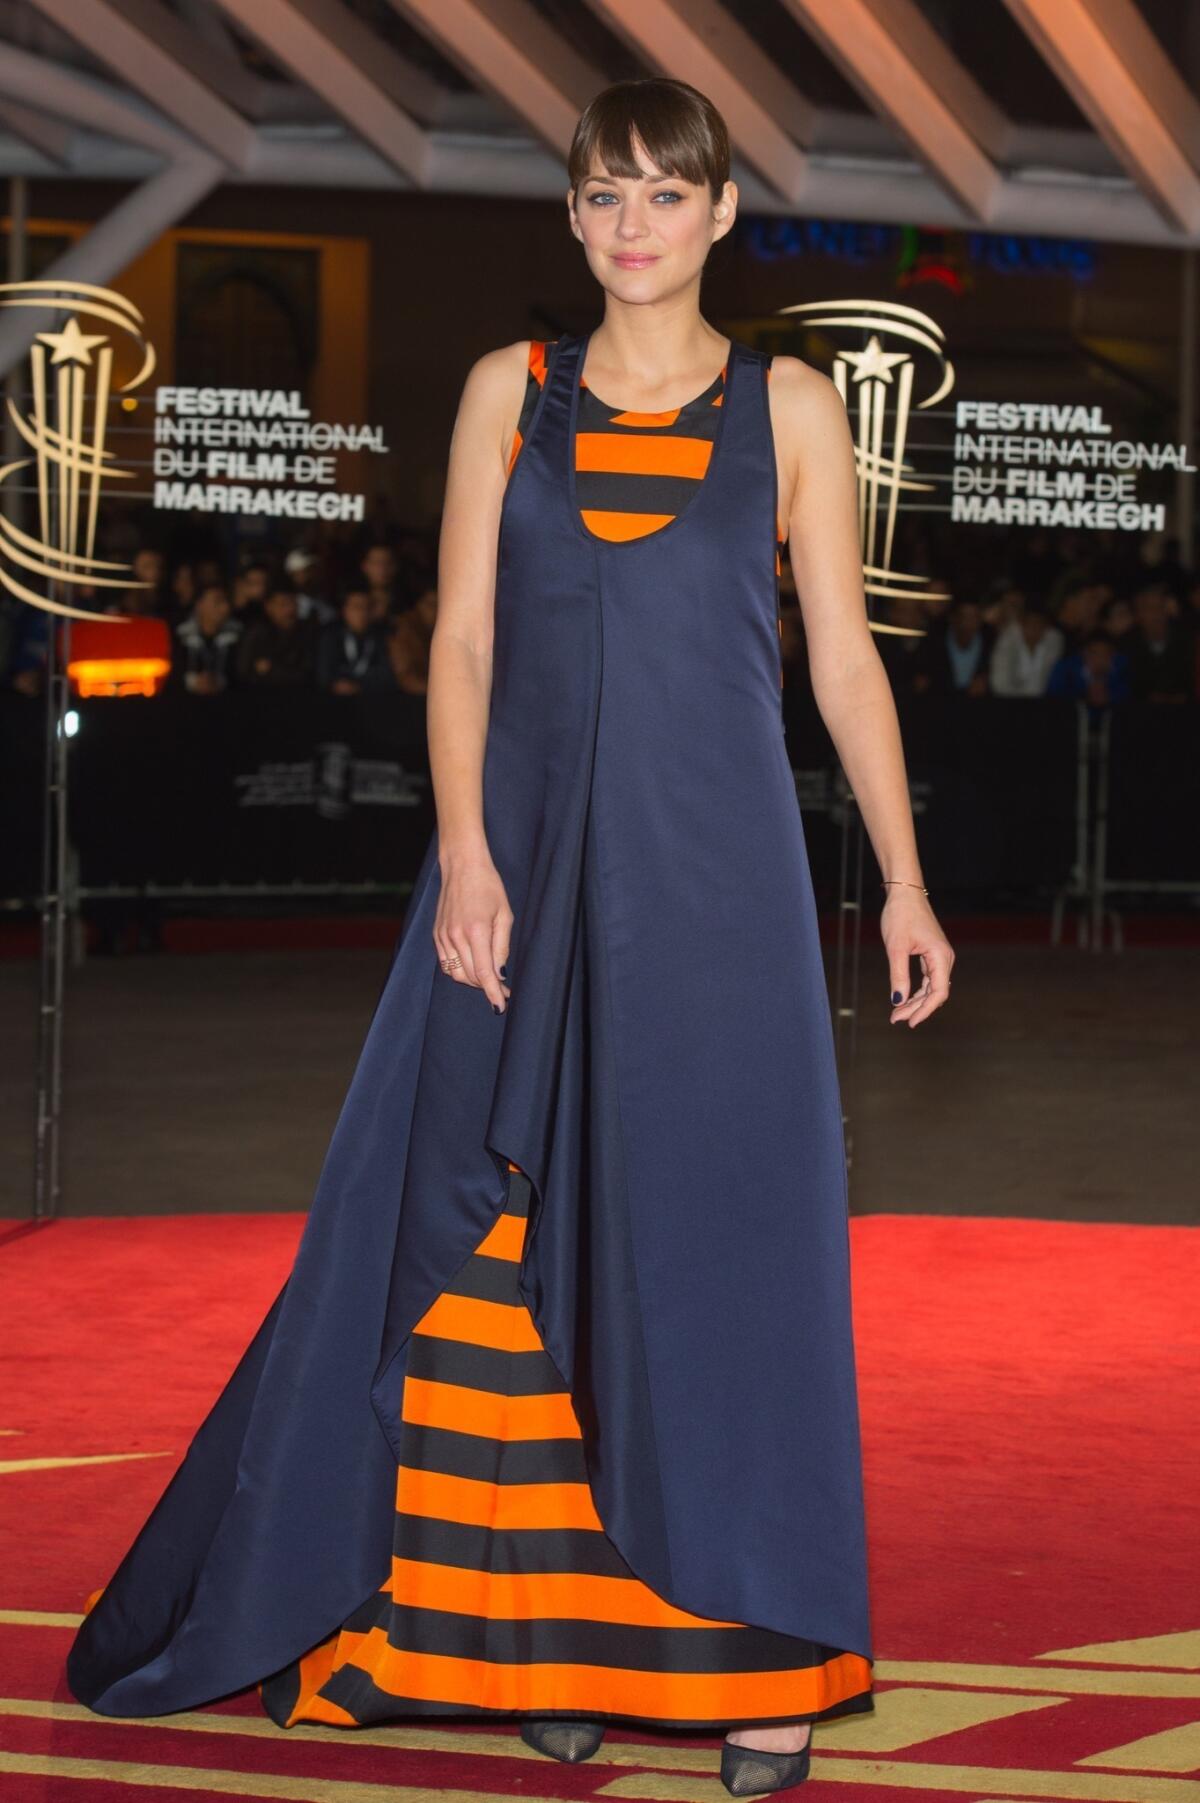 Marion Cotillard wears Dior Haute Couture at the "Waltz With Monica" premiere at the Marrakech International Film Festival in Marrakech, Morocco.